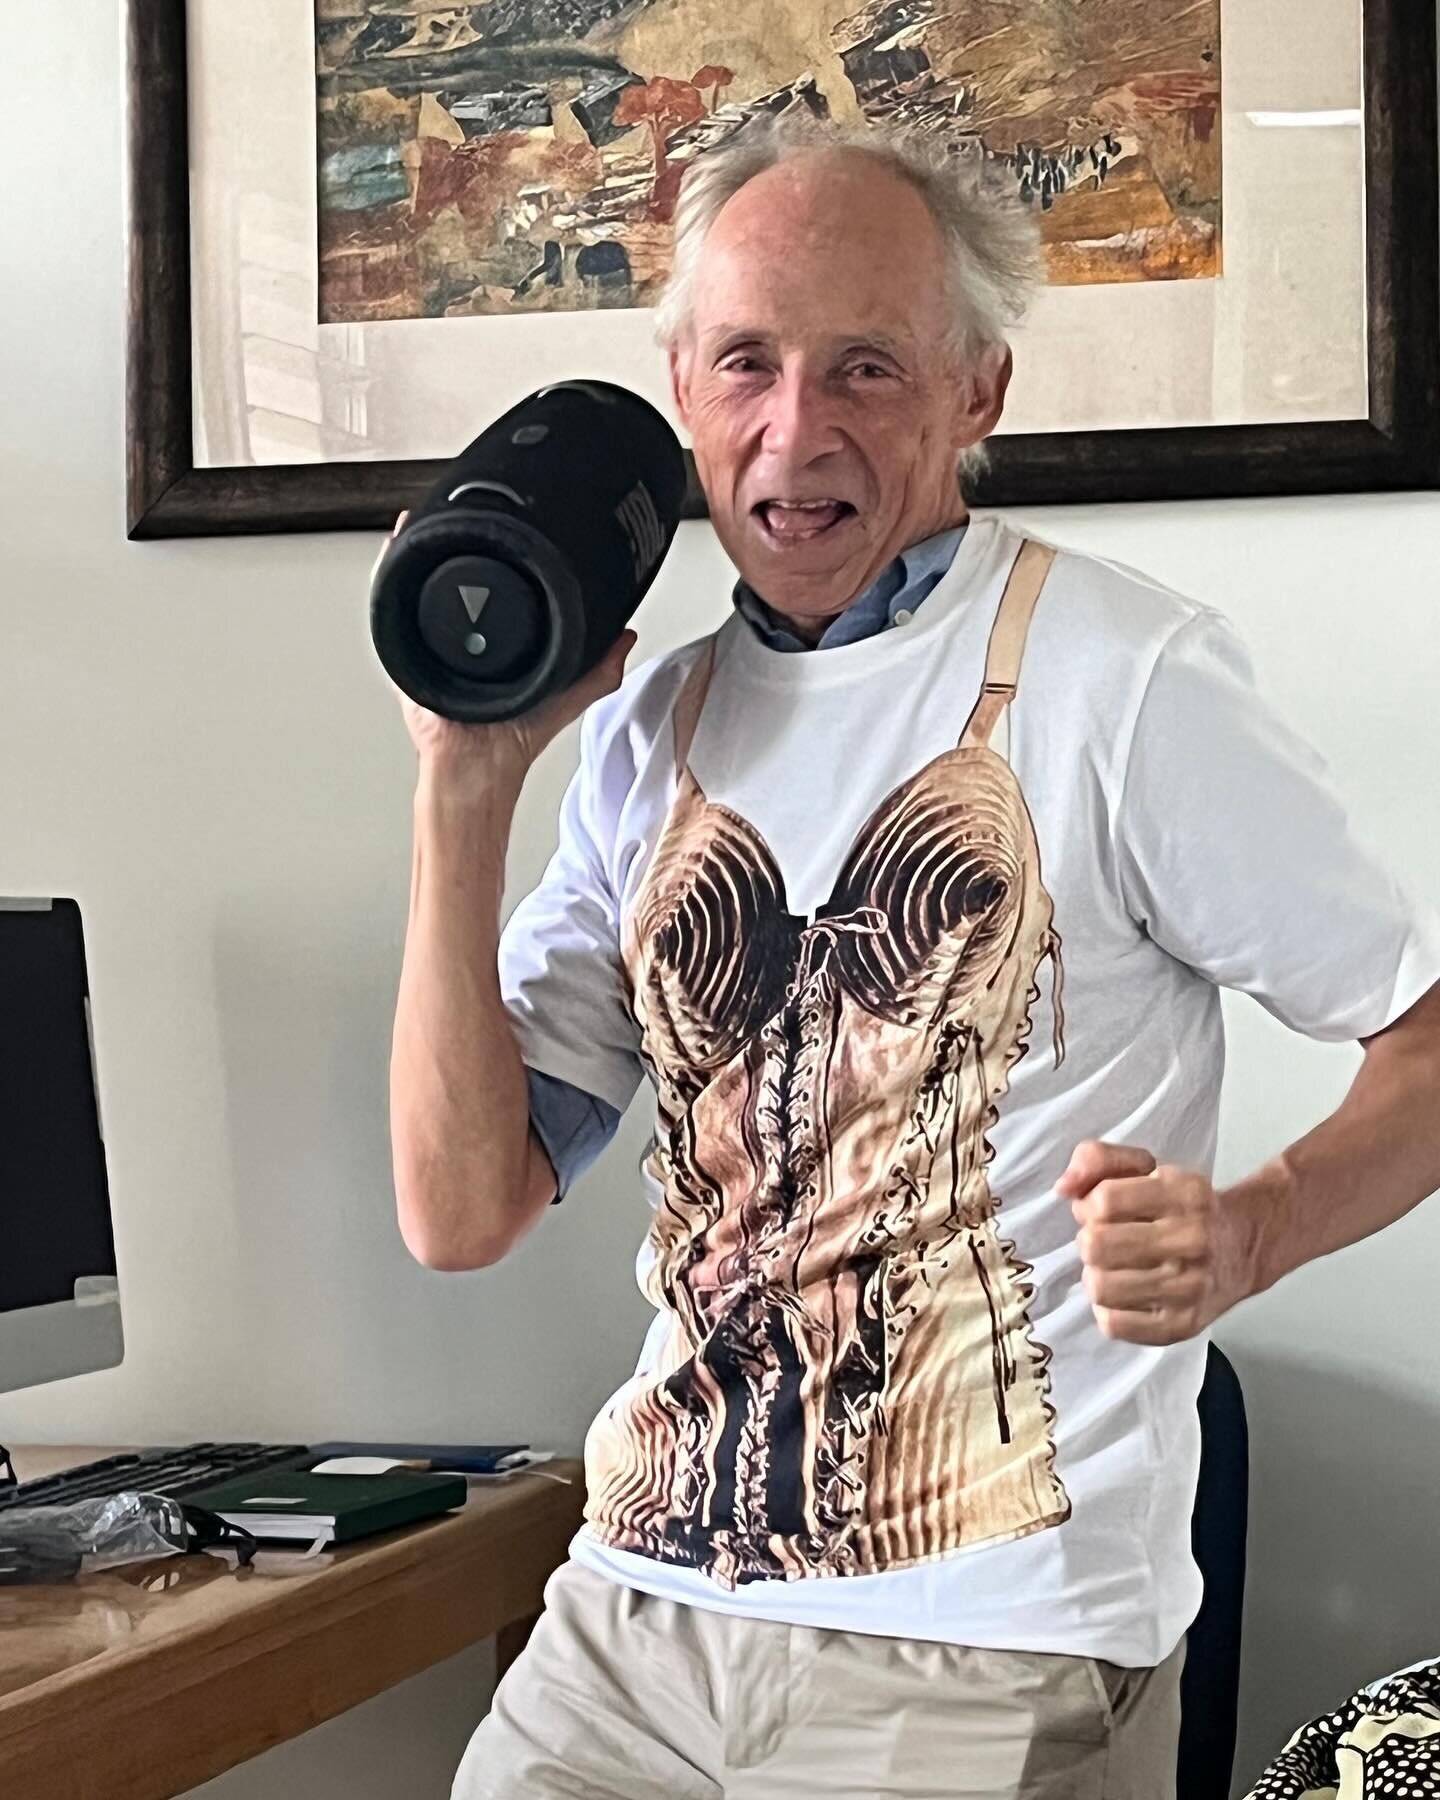 Our fantastic #MercyJamesCentre Medical Director Dr. Borgstein in his @madonna x @jeanpaulgaultier exclusive t-shirt! Purchase yours now at the link in our bio to support life-saving care for Malawian youth at Raising Malawi&rsquo;s pediatric hospita